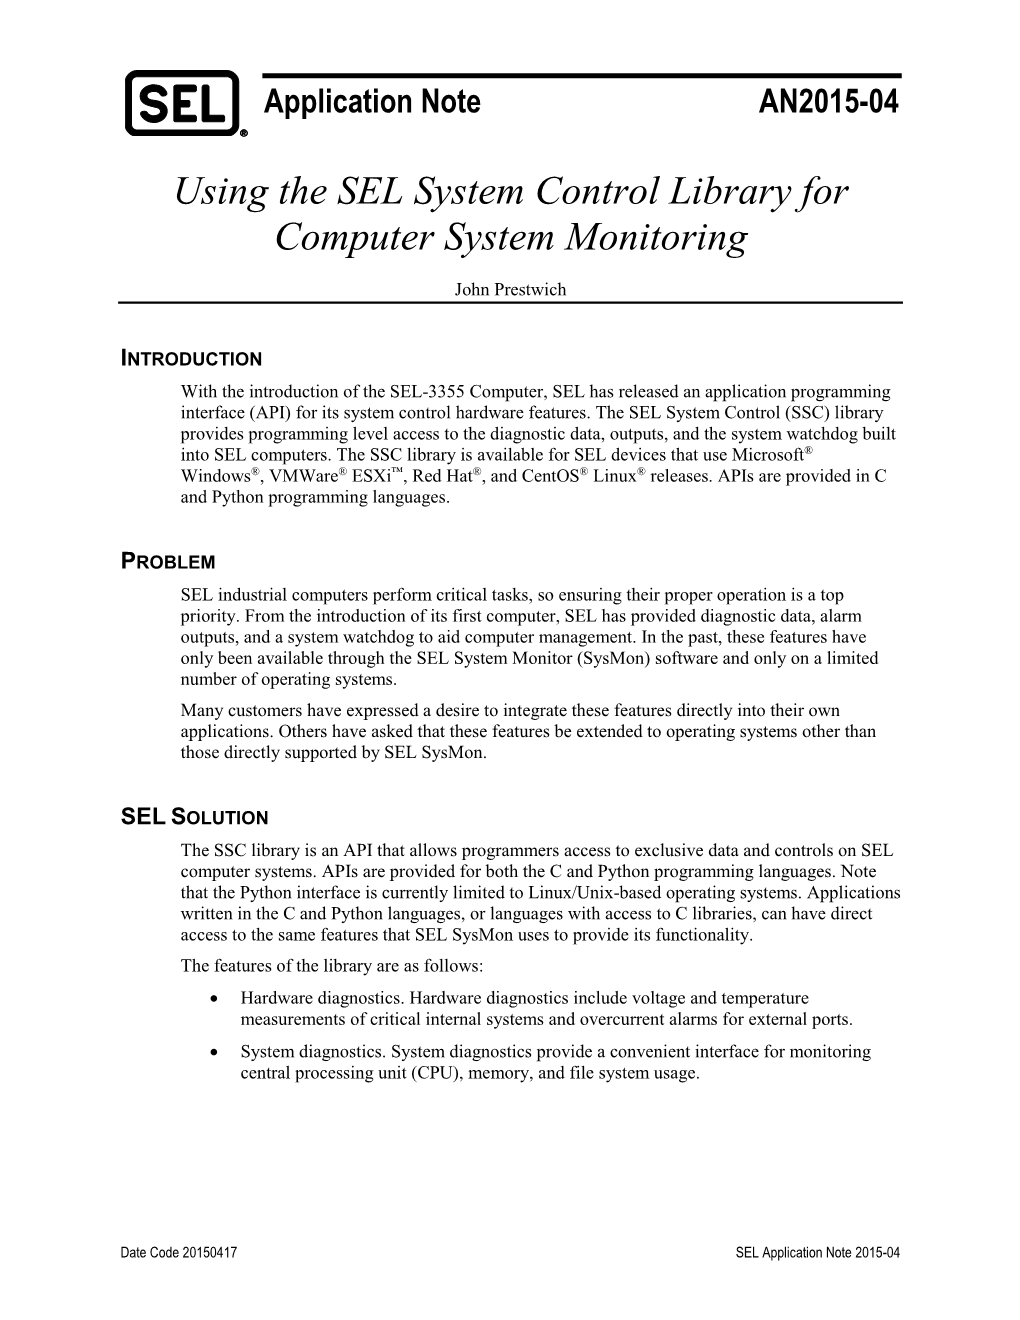 Using the SEL System Control Library for Computer System Monitoring